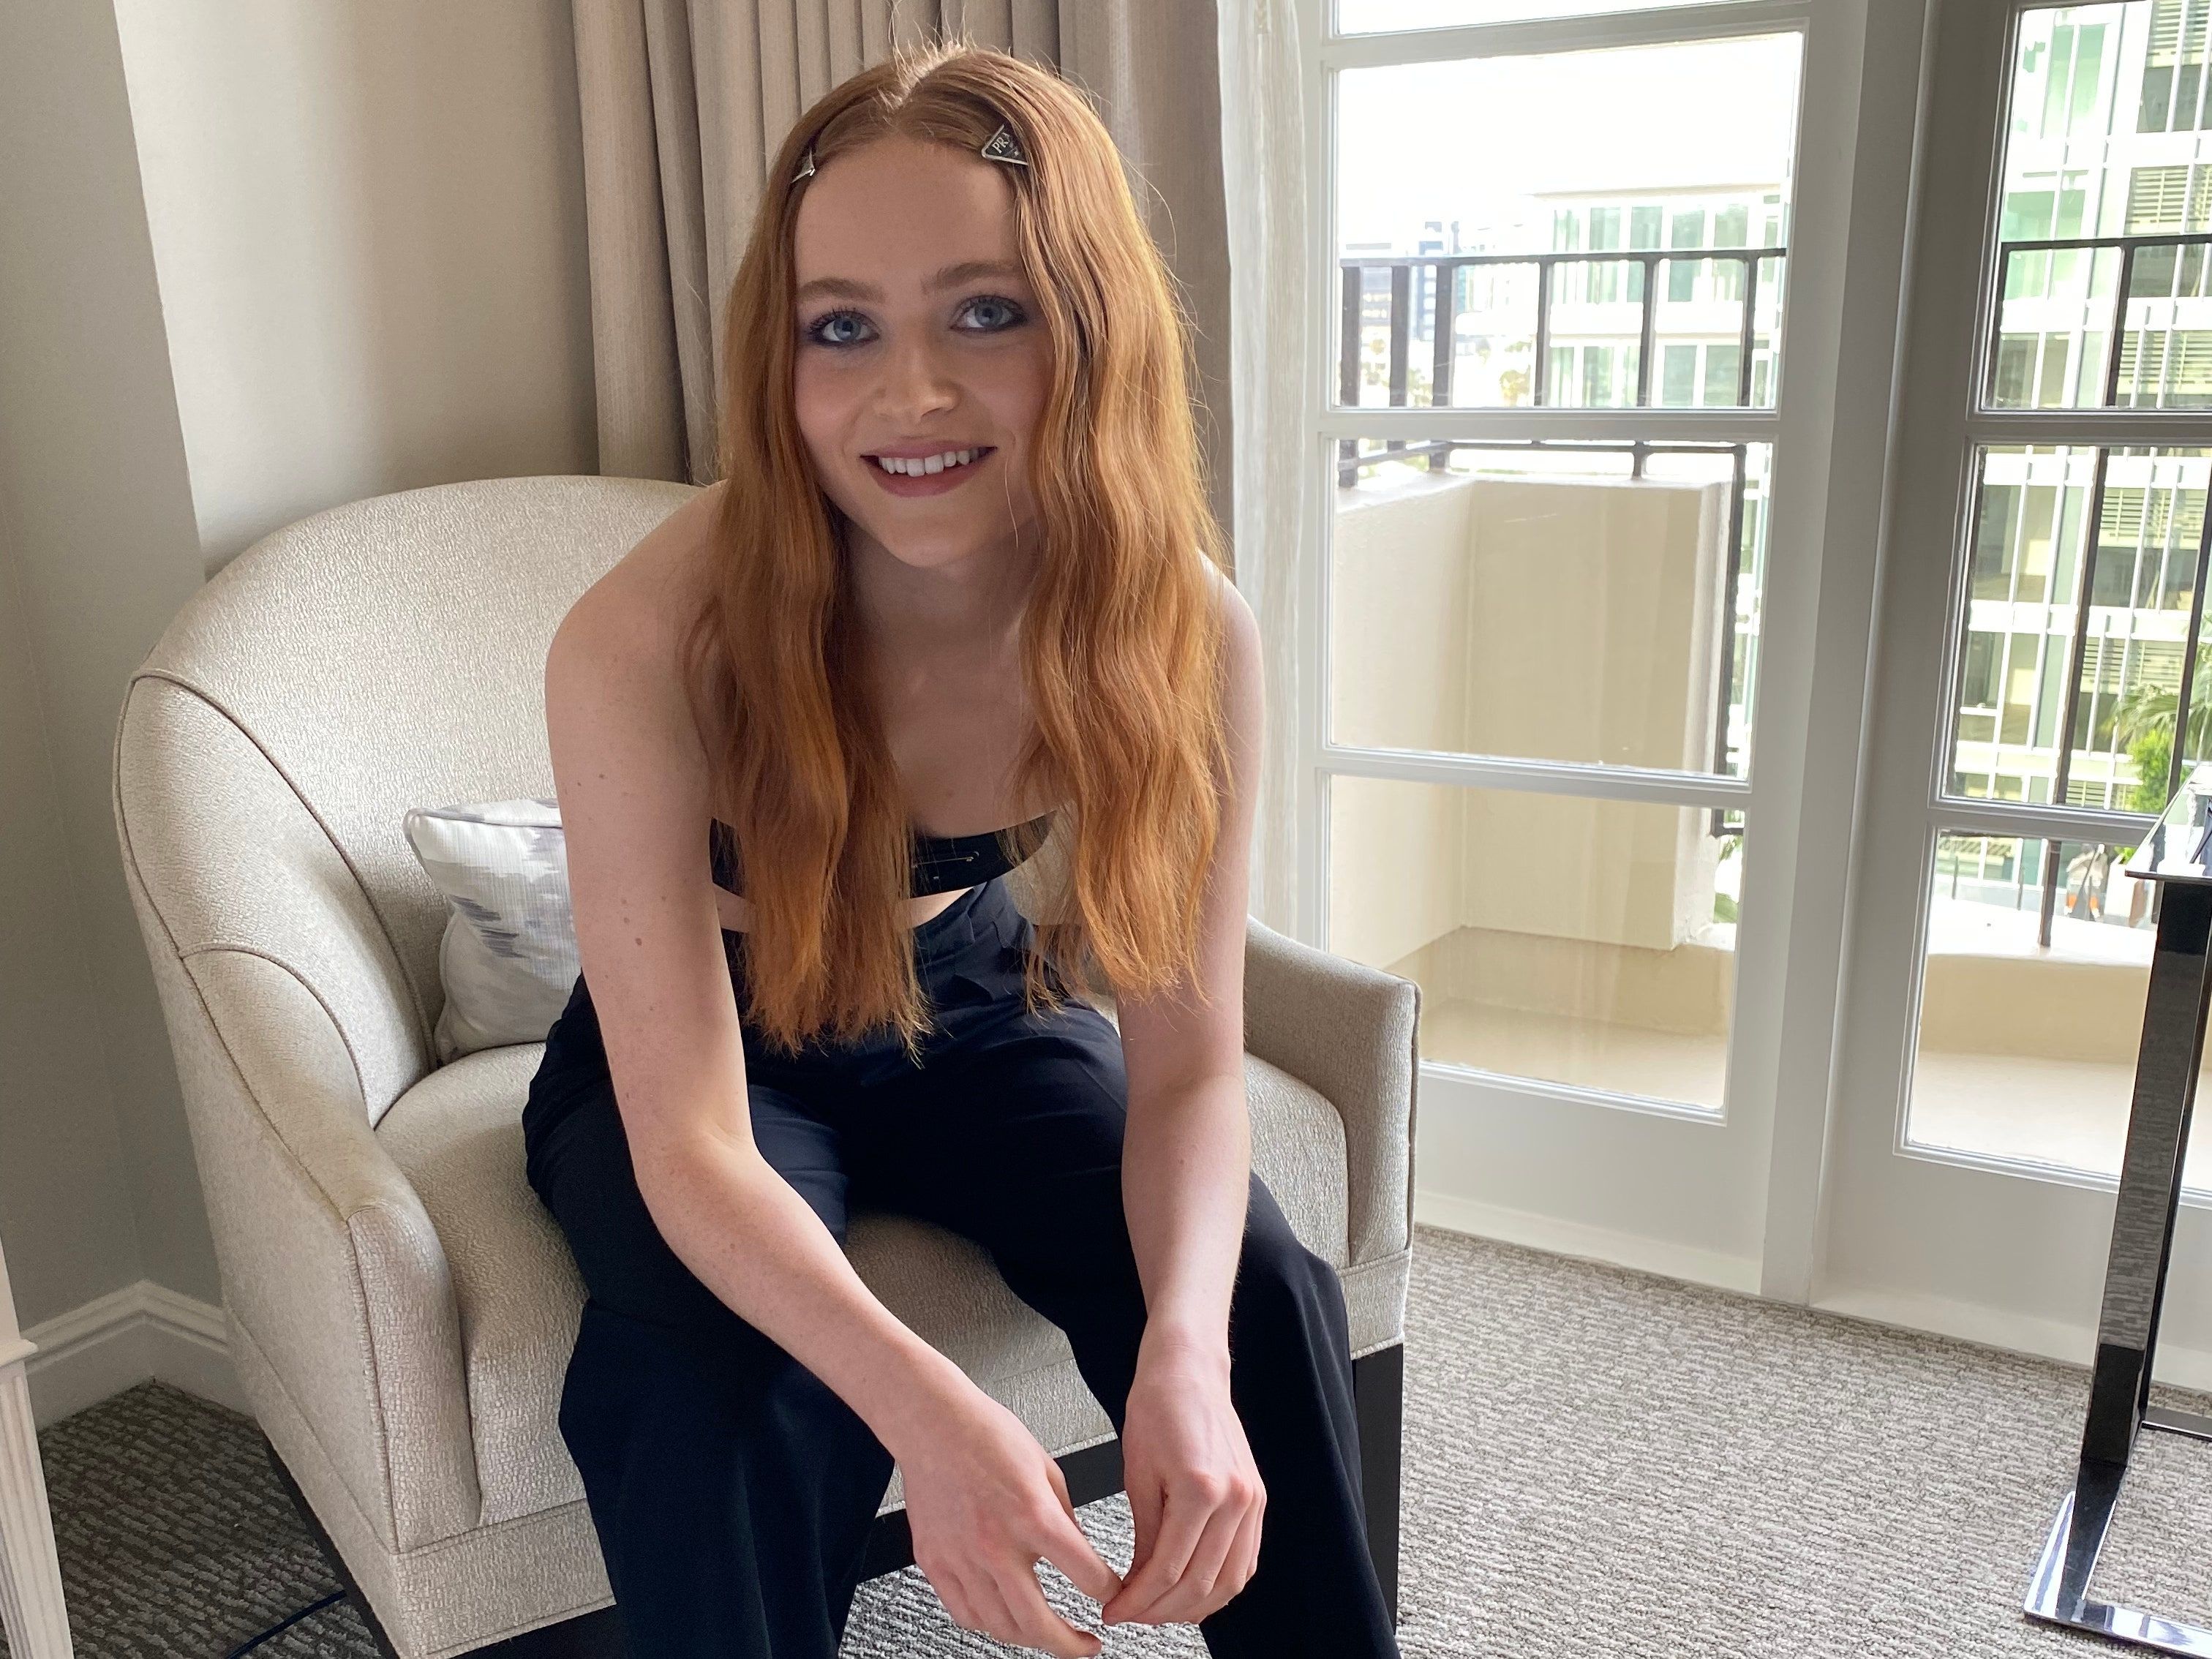 Sadie Sink Decked Herself Out in Prada for the Fear Street Premiere